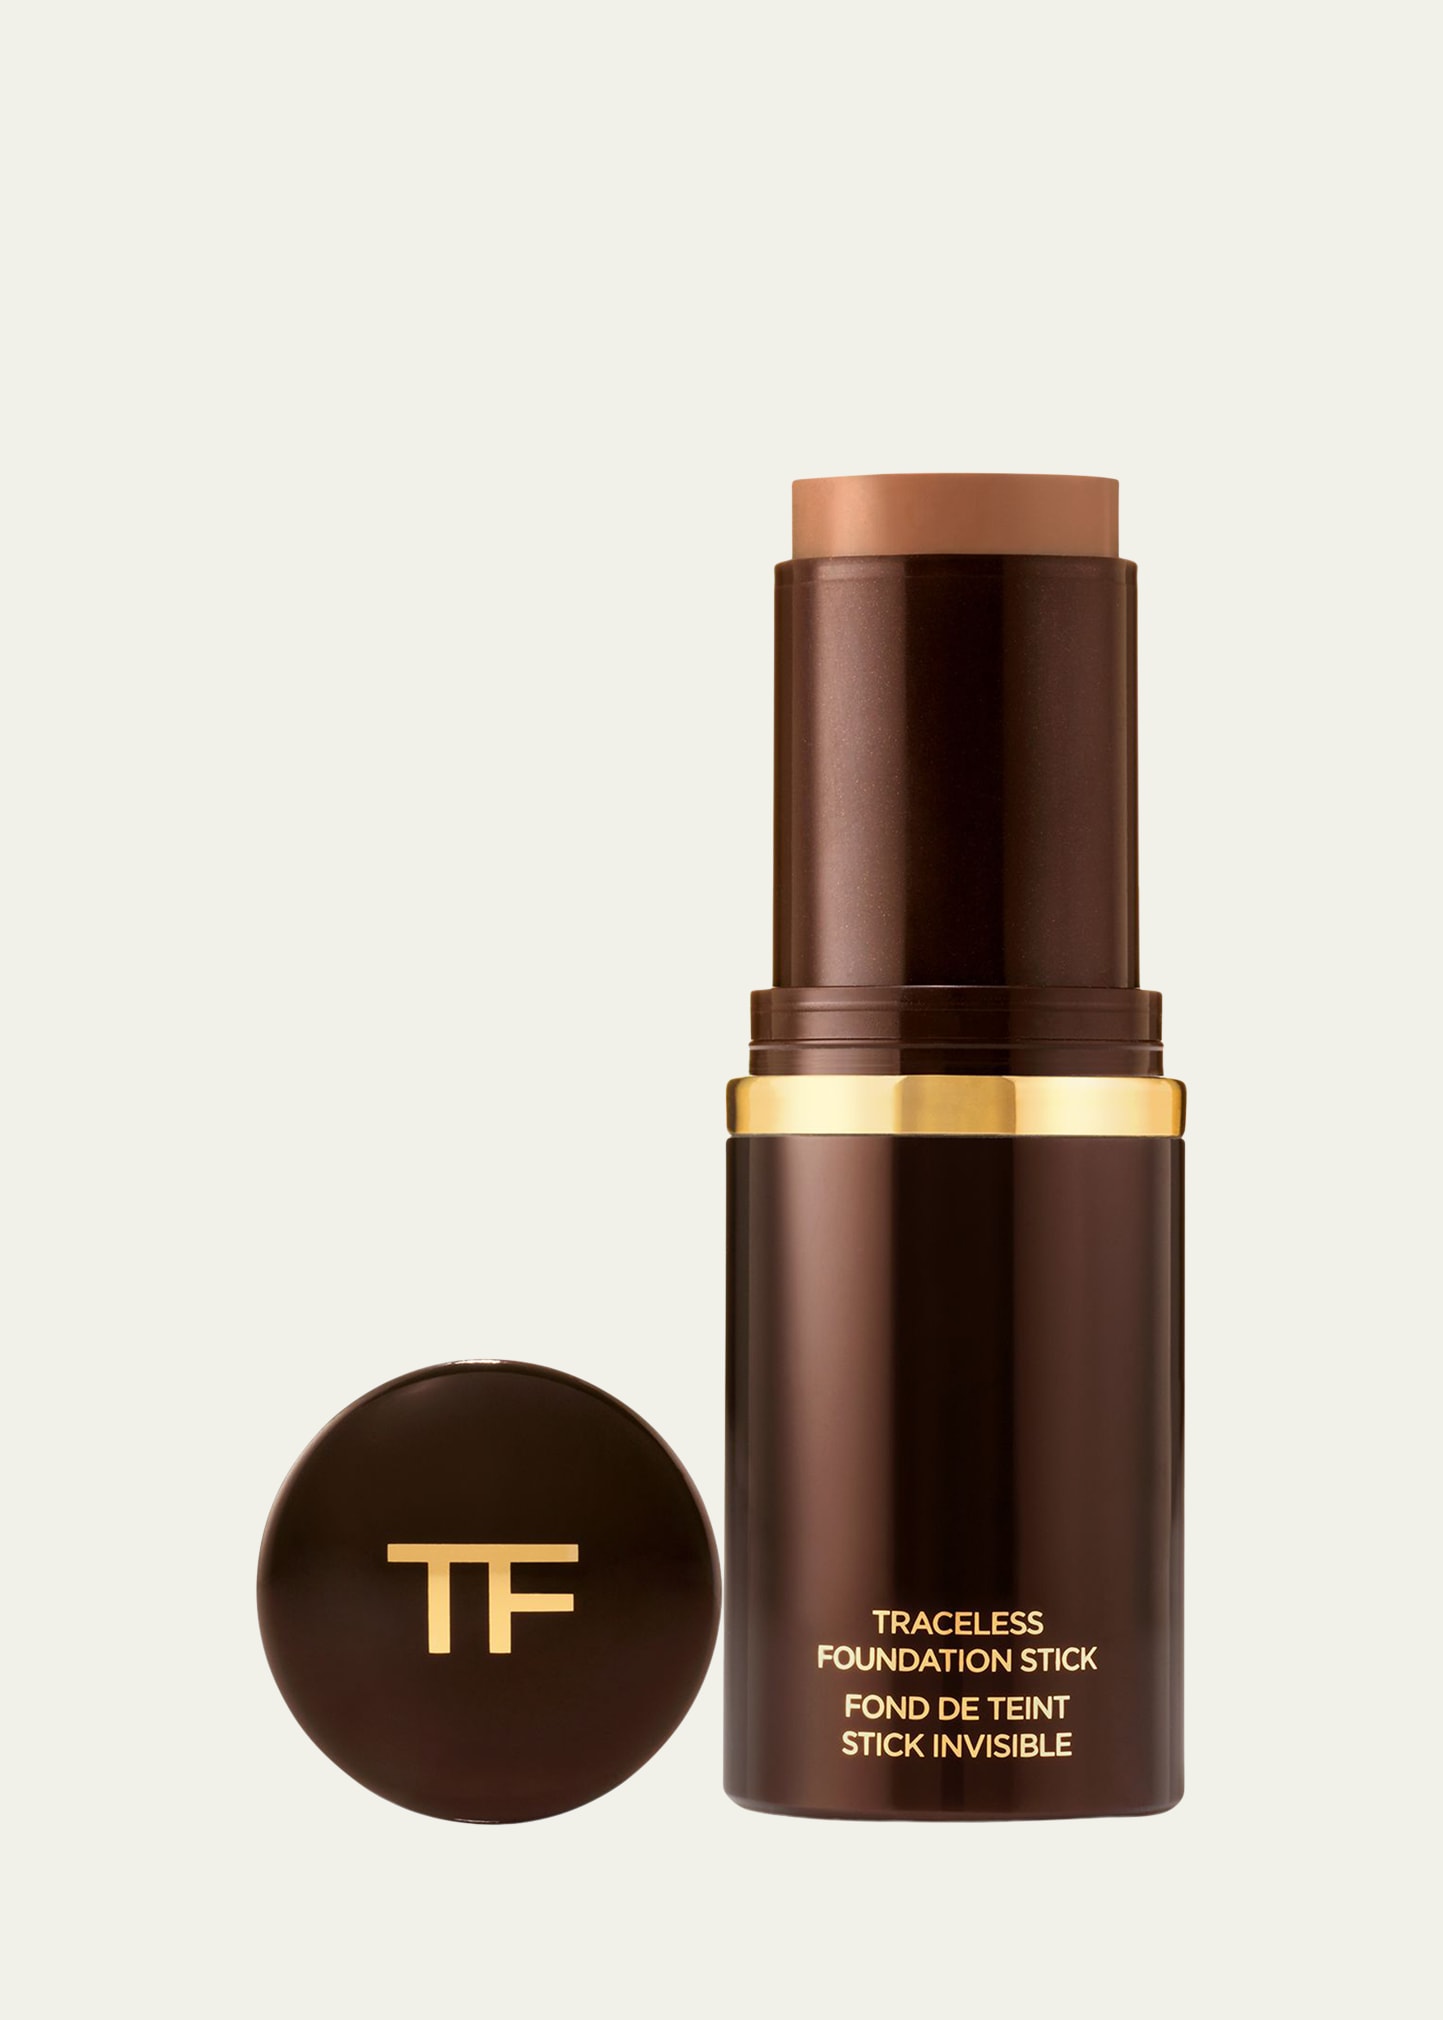 Tom Ford Traceless Foundation Stick In 9.5 Warm Almond